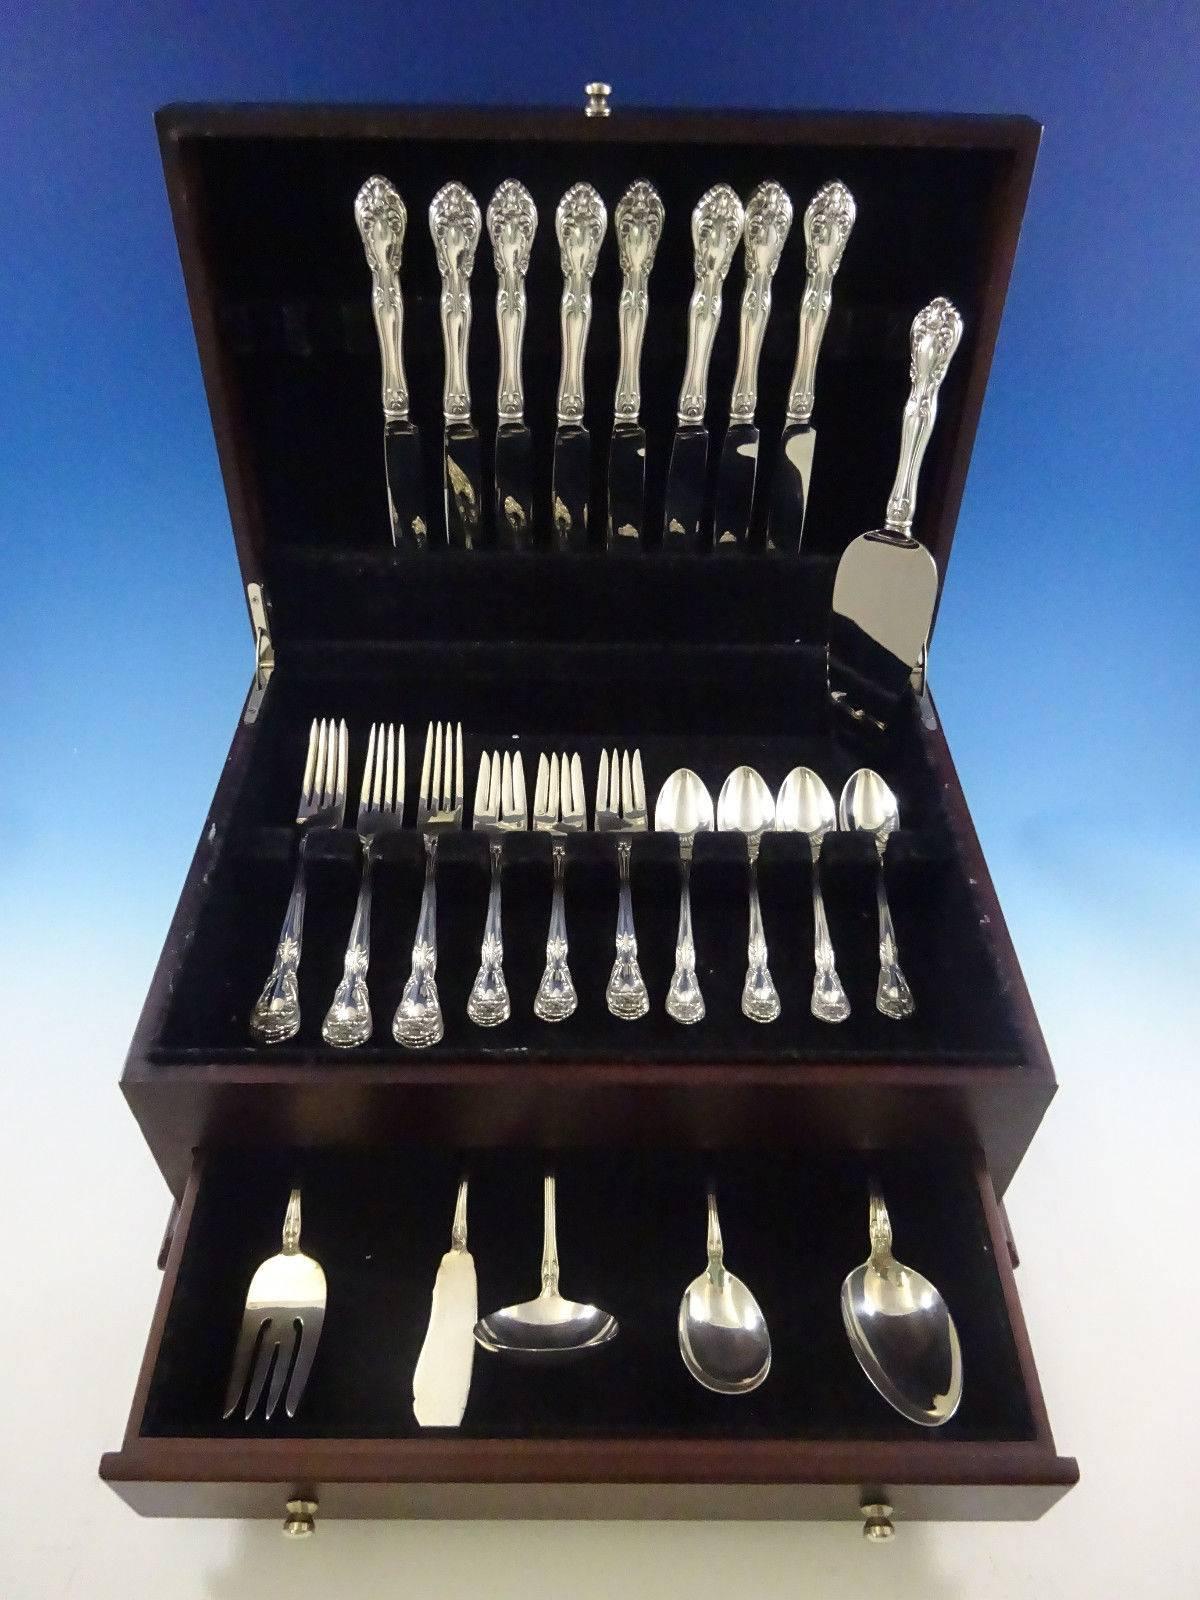 Chateau Rose by Alvin sterling silver dinner size flatware set, 38 pieces. This set includes: 

eight dinner size knives, 9 1/2